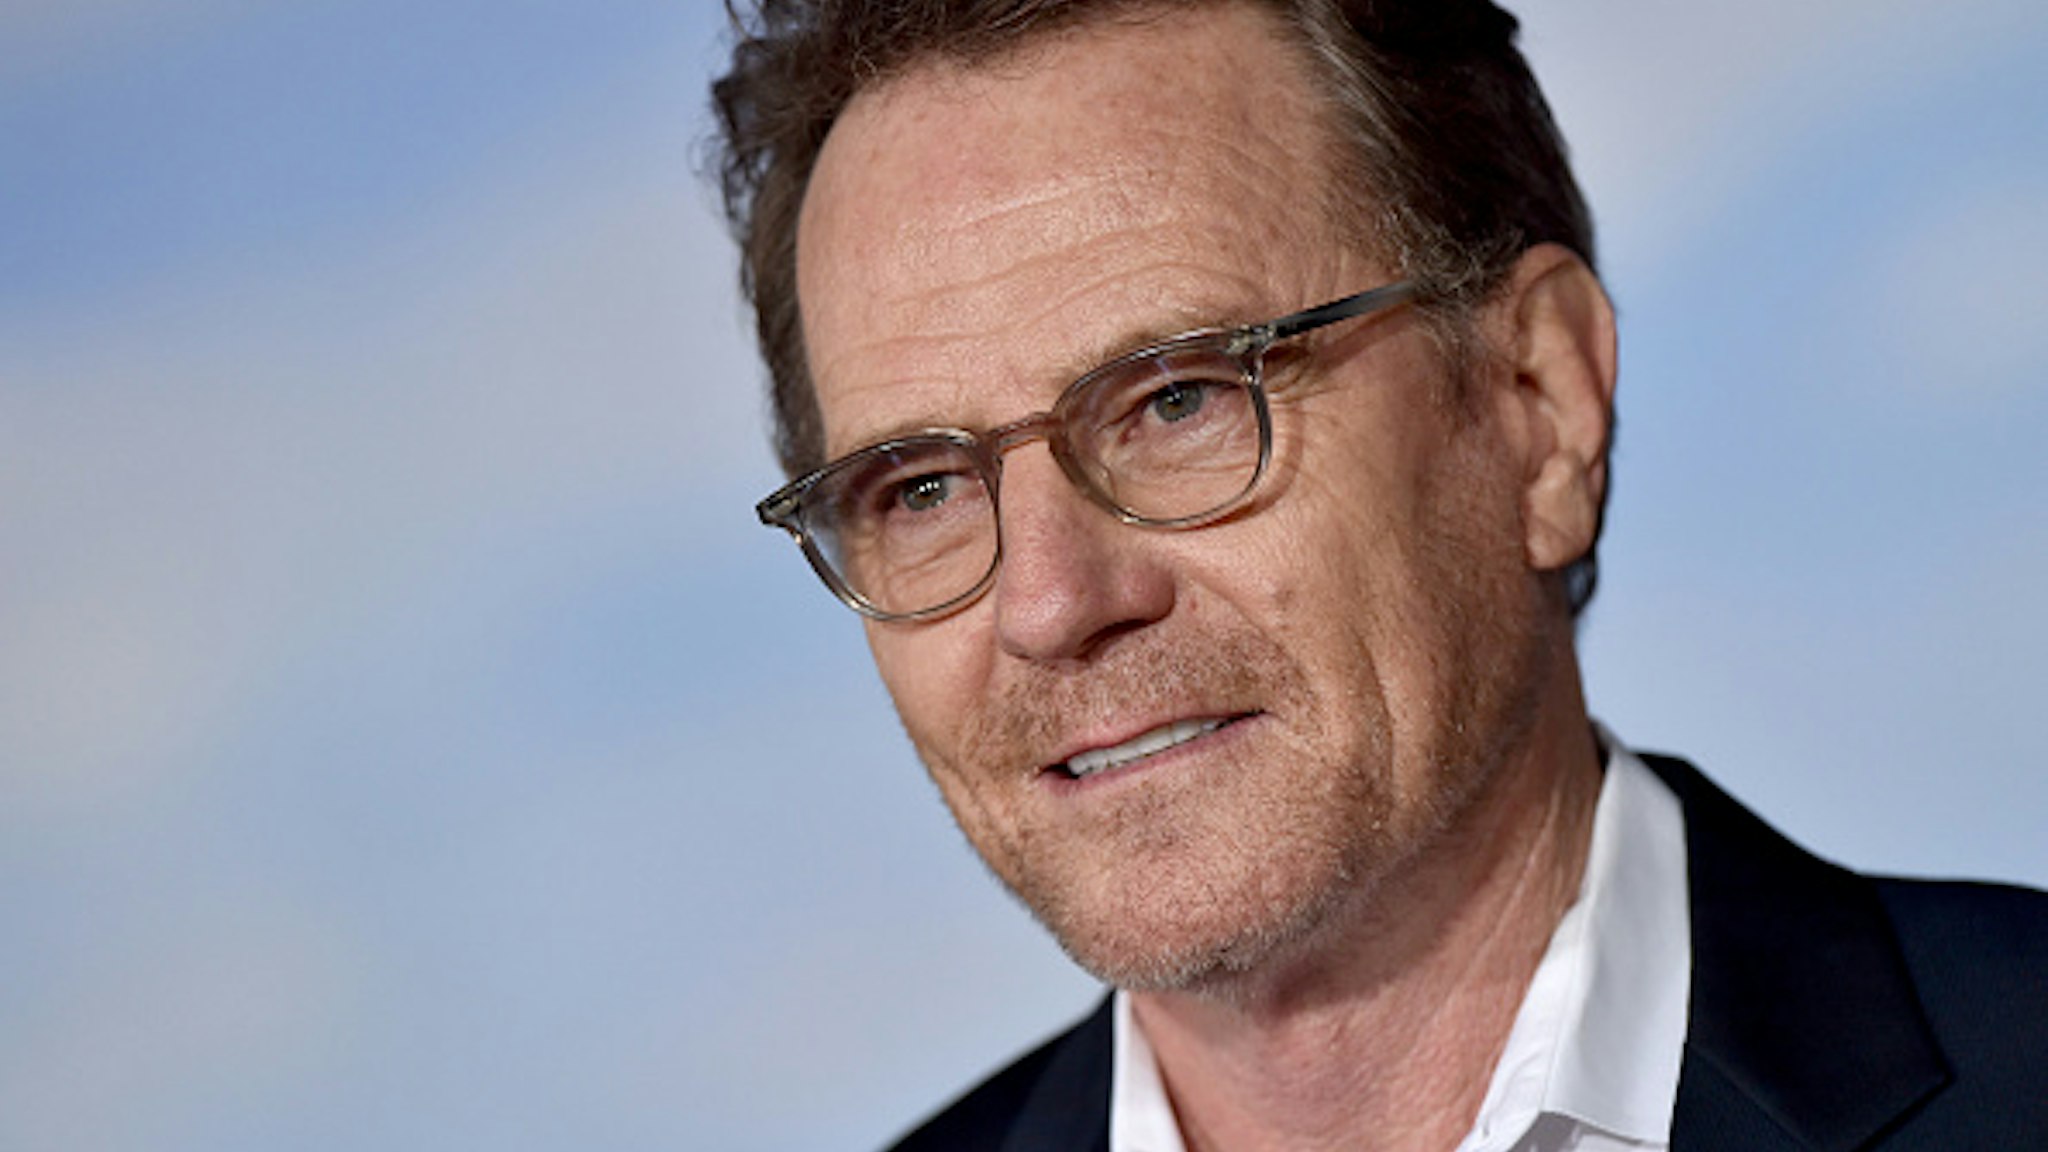 WESTWOOD, CALIFORNIA - OCTOBER 07: Bryan Cranston attends the Premiere of Netflix's "El Camino: A Breaking Bad Movie" at Regency Village Theatre on October 07, 2019 in Westwood, California.